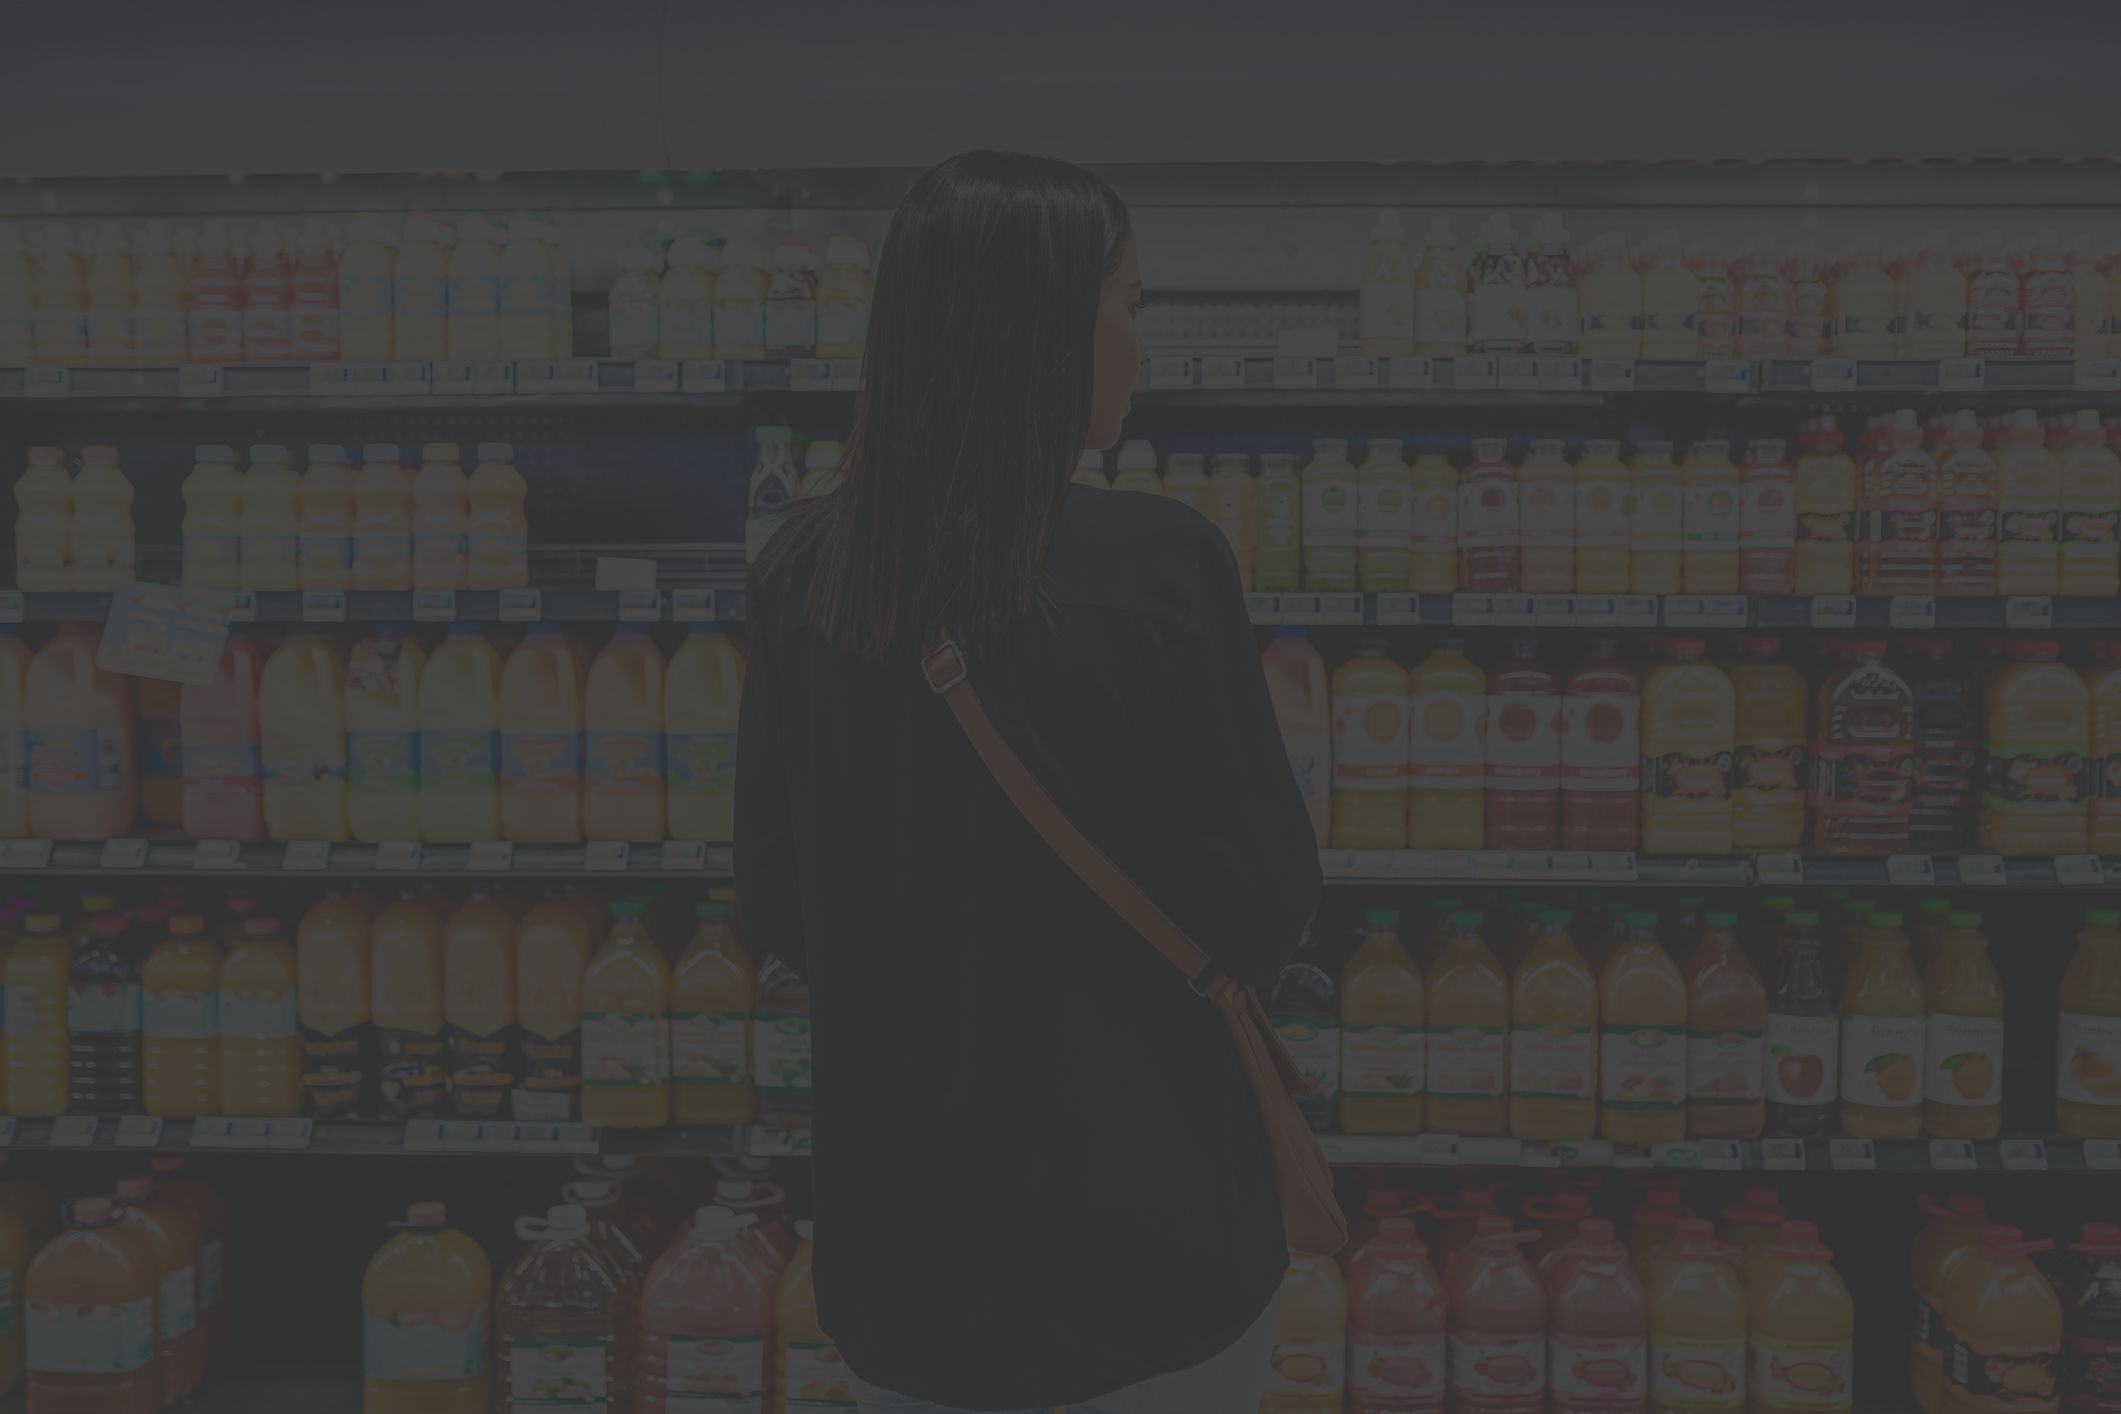 woman looking at juice on shelves at market